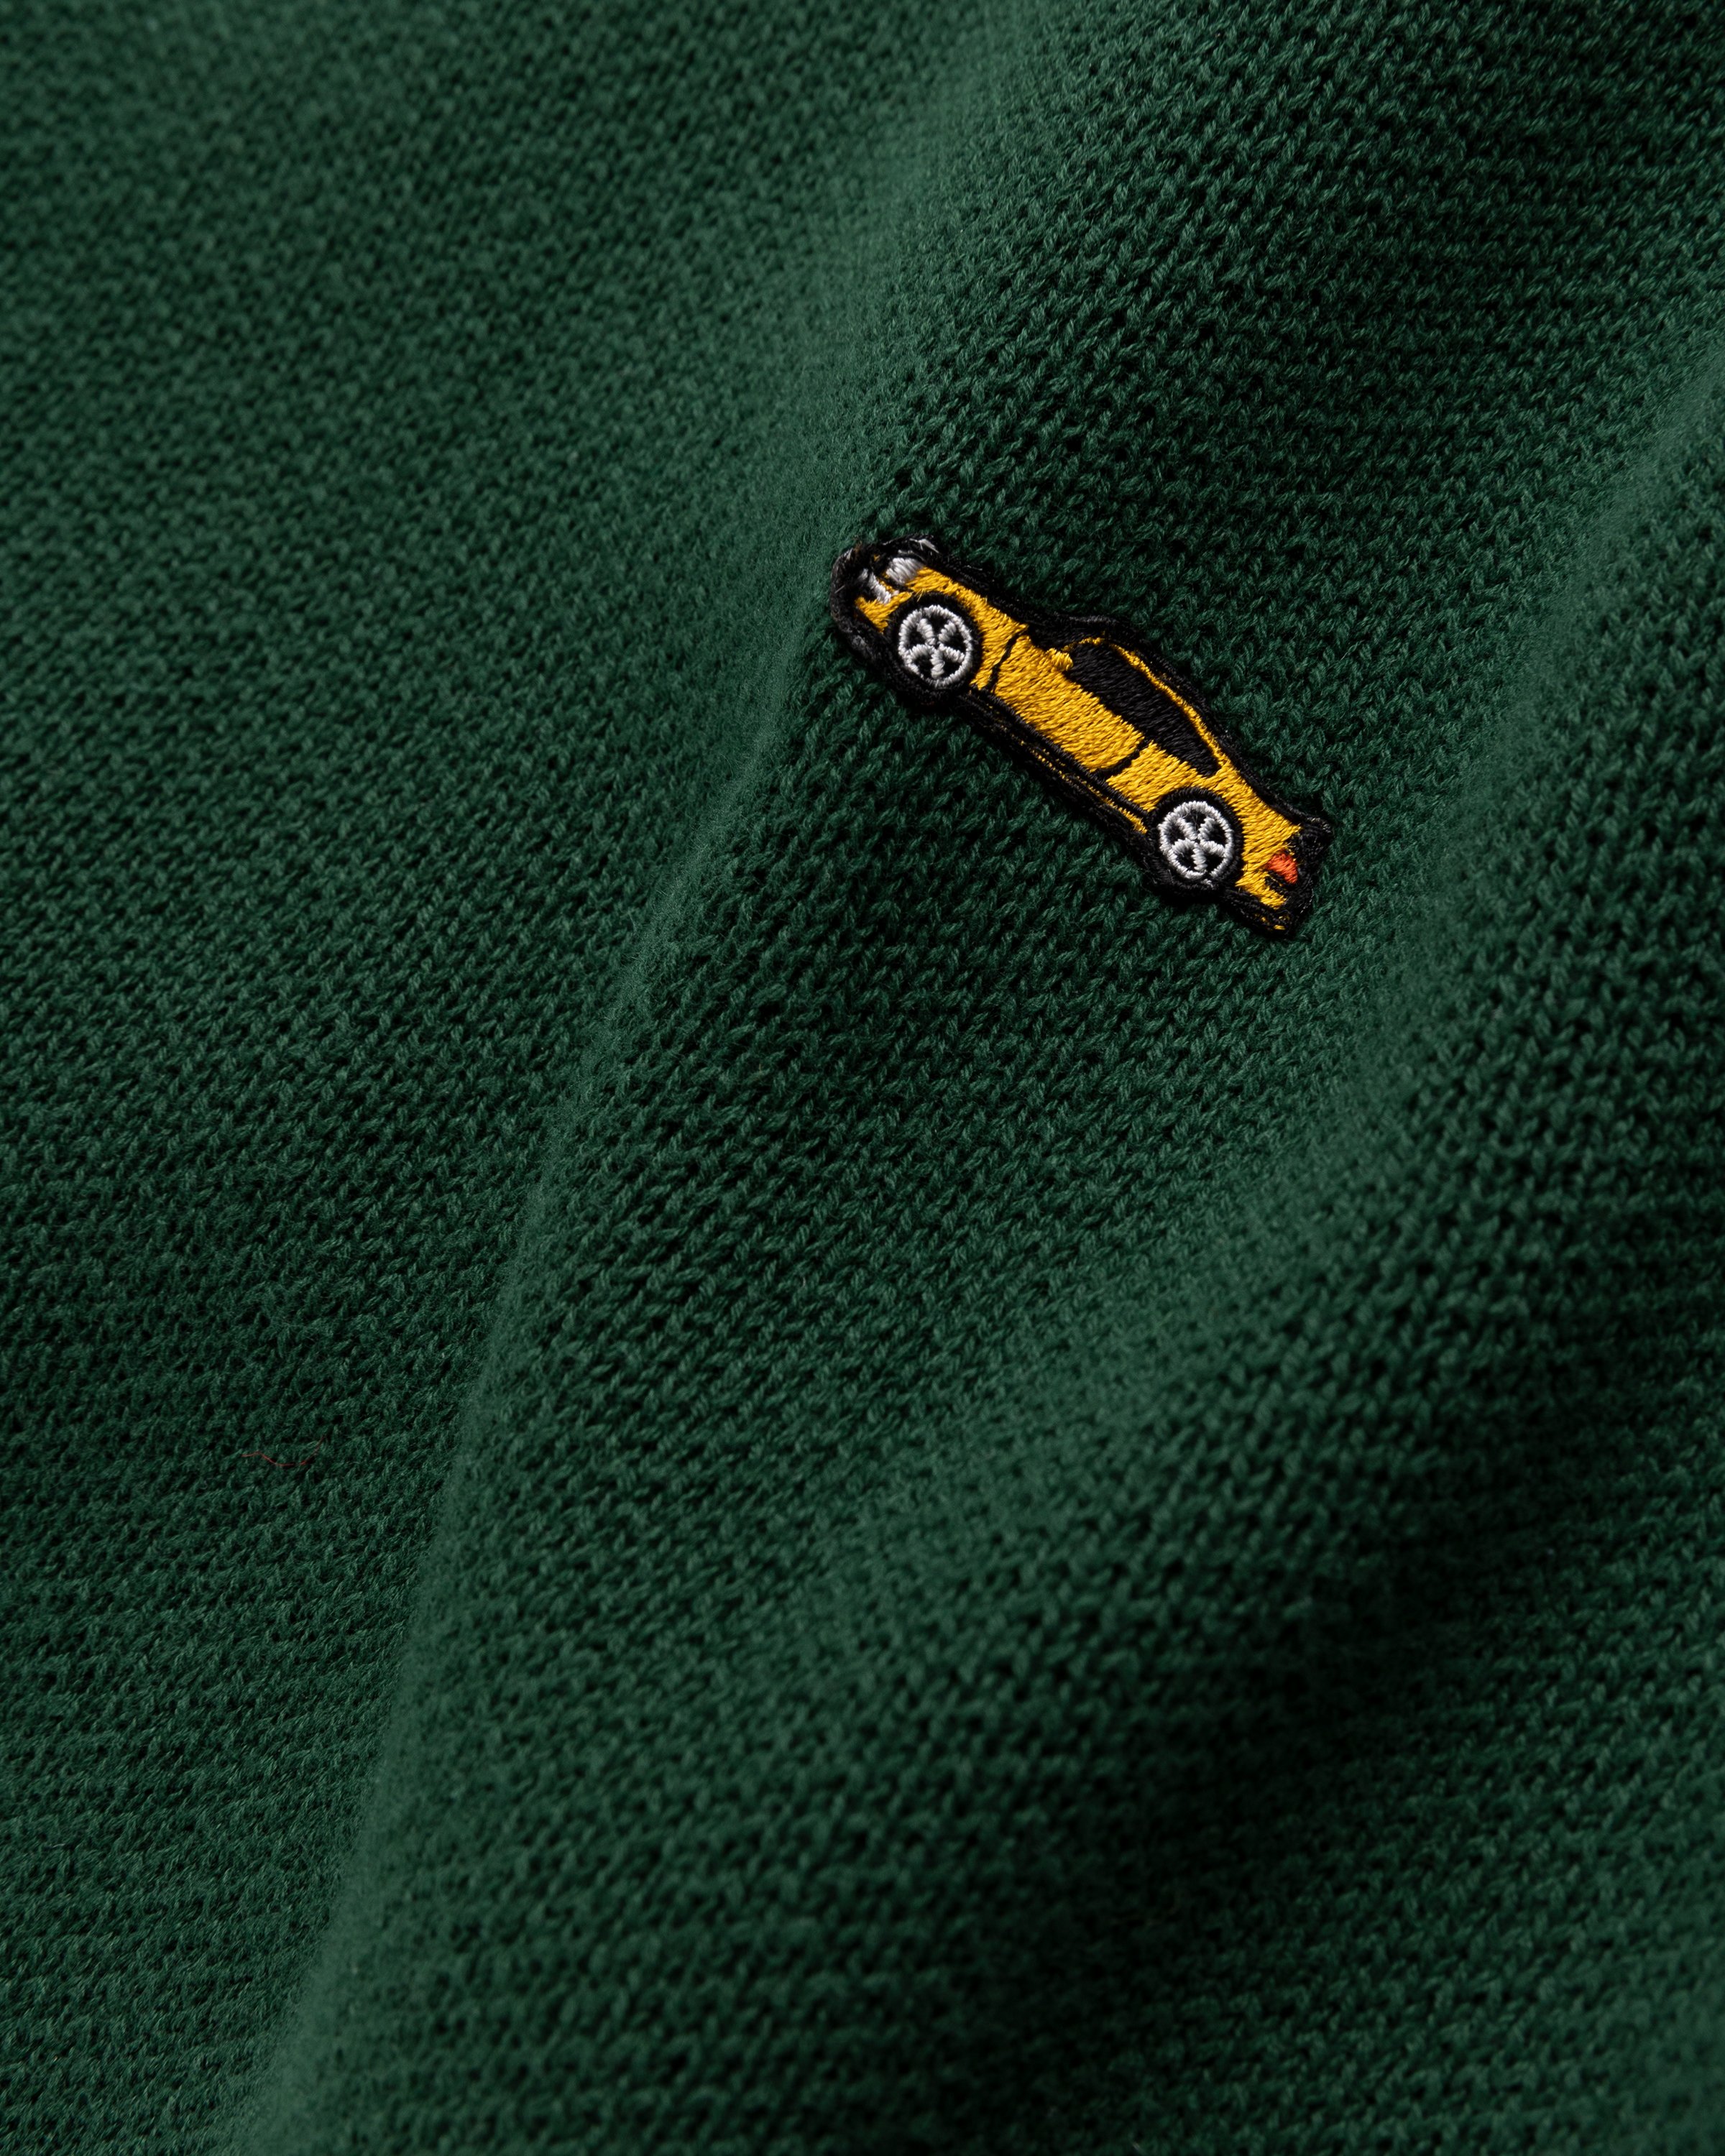 RUF x Highsnobiety - Knitted Crewneck Sweater Green - Clothing - Green - Image 3